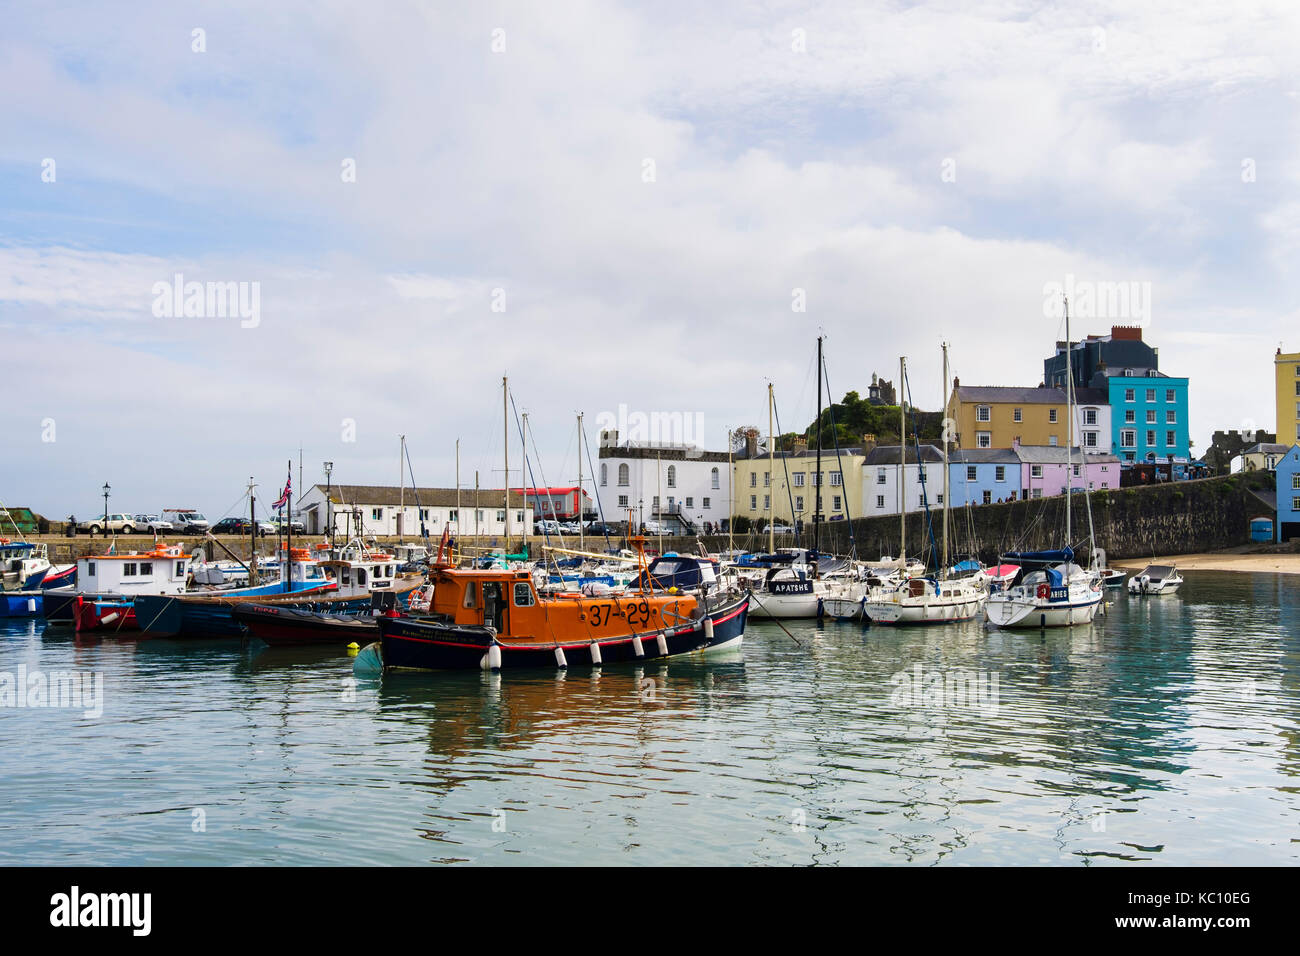 Boats and lifeboat moored in the old harbour at high tide. Tenby, Carmarthen Bay, Pembrokeshire, Wales, UK, Britain Stock Photo